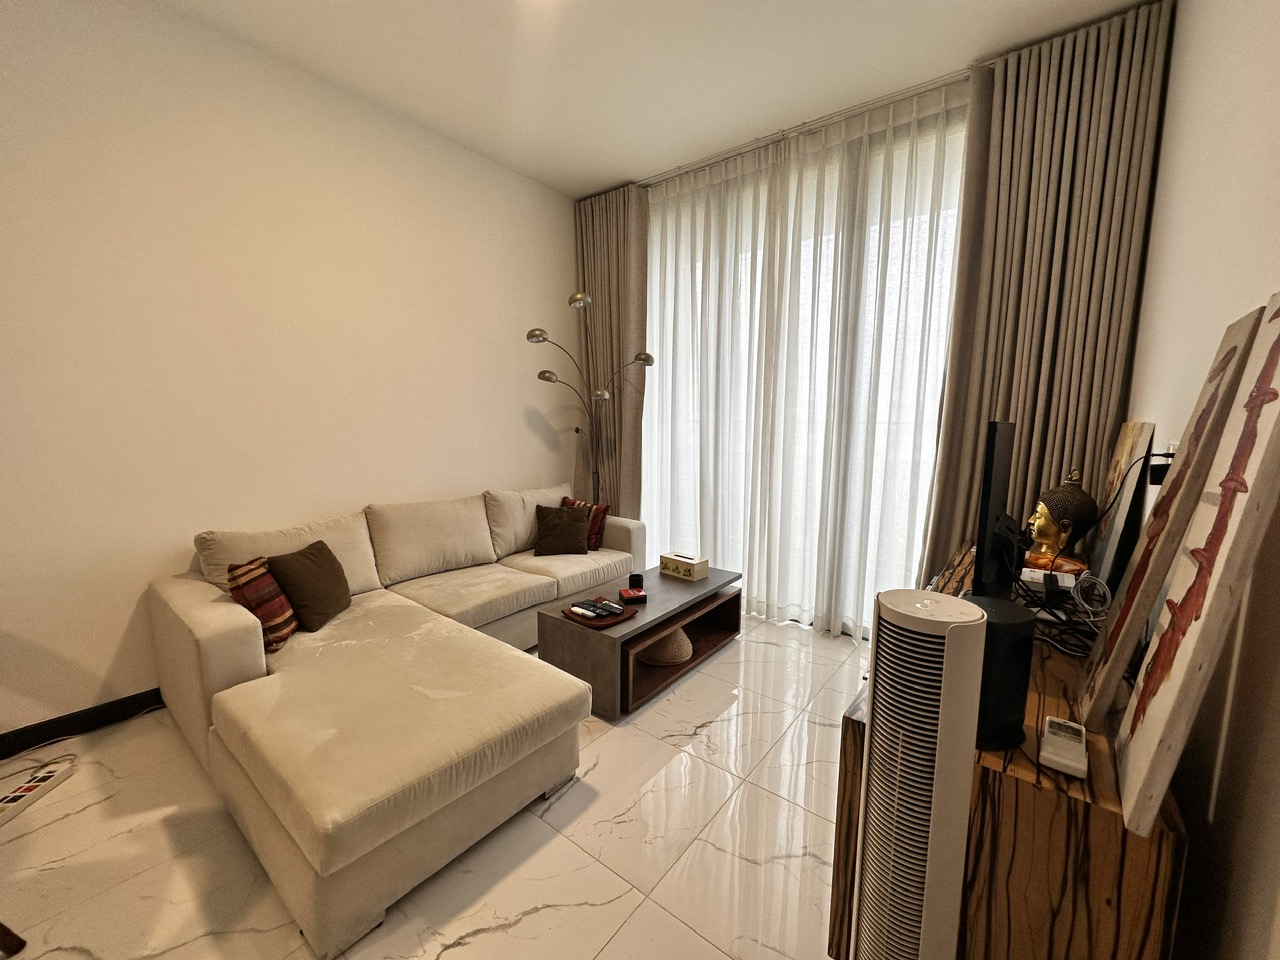 1 bedroom apartment for rent with large balcony in Empire City with full furniture